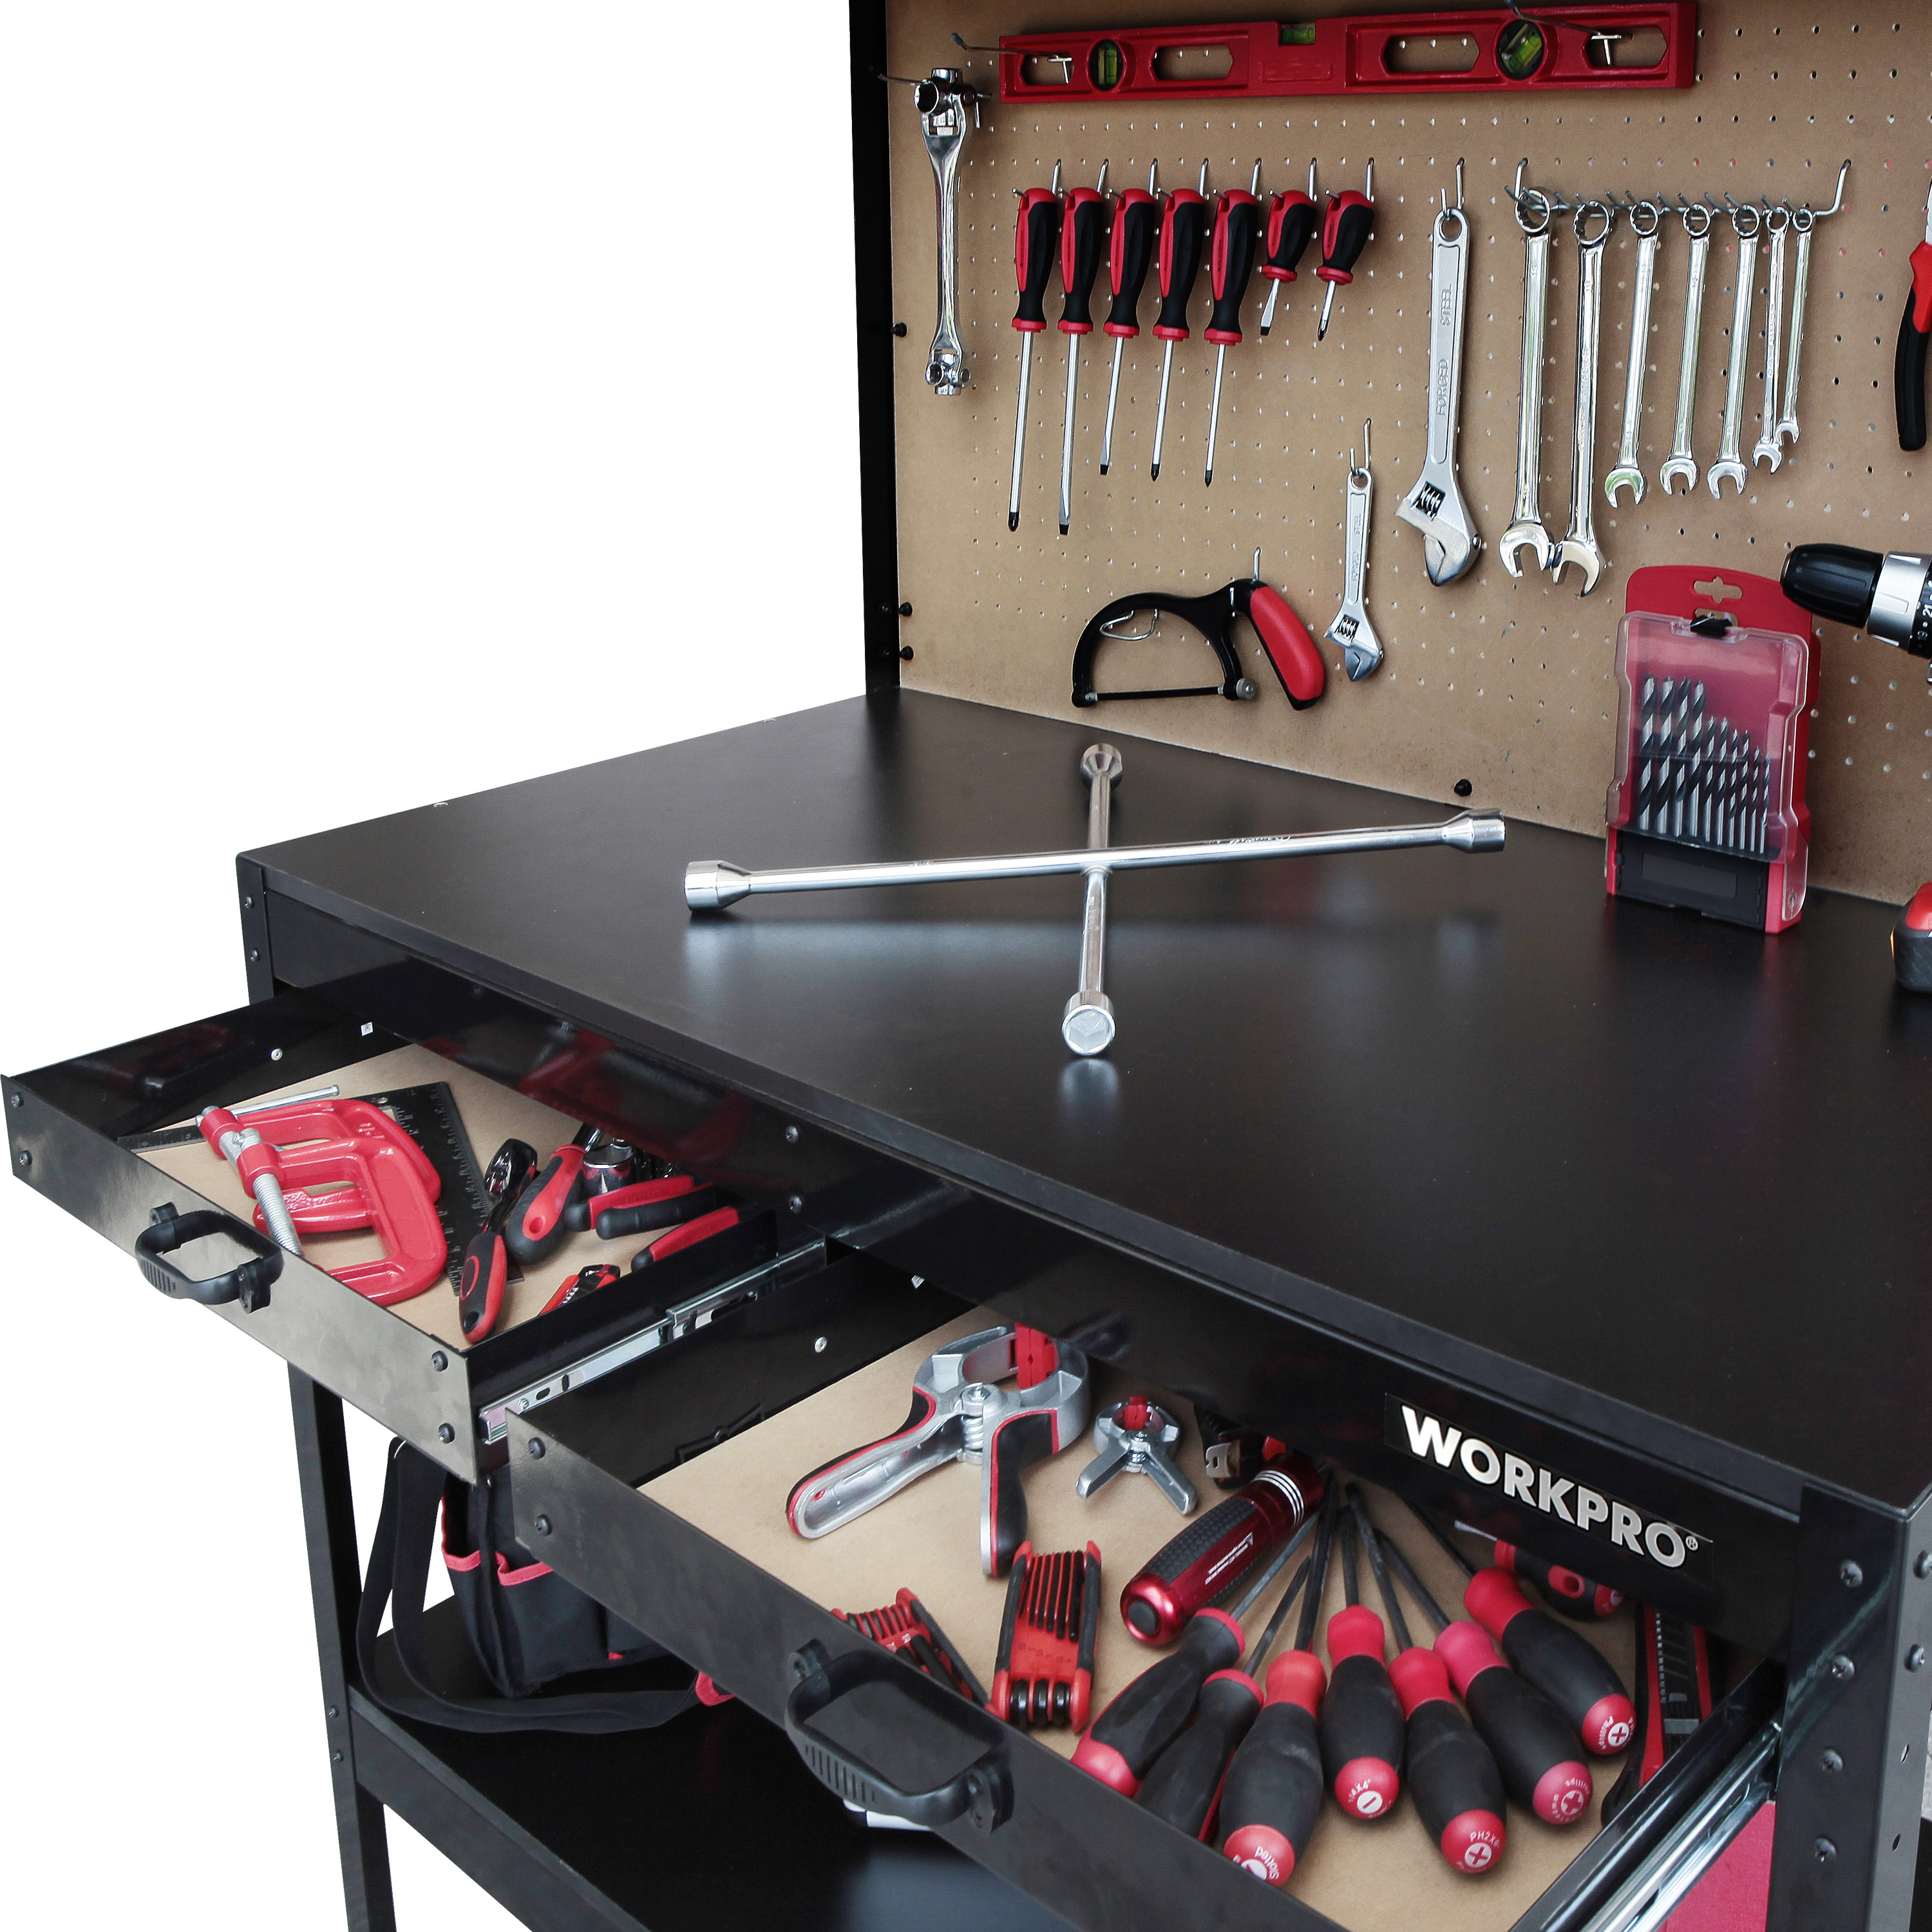 WORKPRO Multi-Purpose 48-Inch Workbench with Work Light, 3302 - image 8 of 10